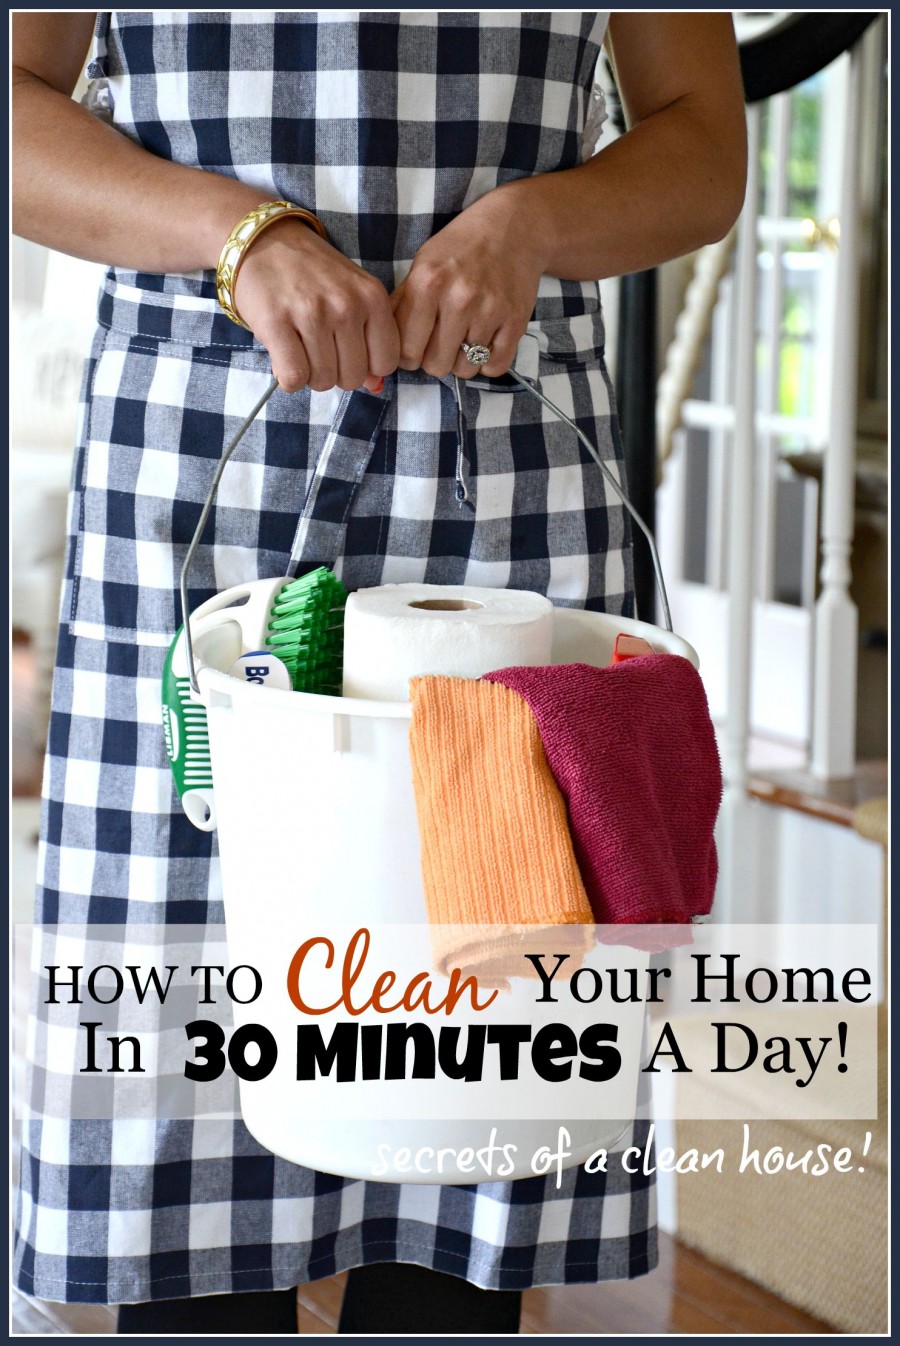 HOW TO CLEAN YOUR HOME IN 30 MINUTES A DAY!